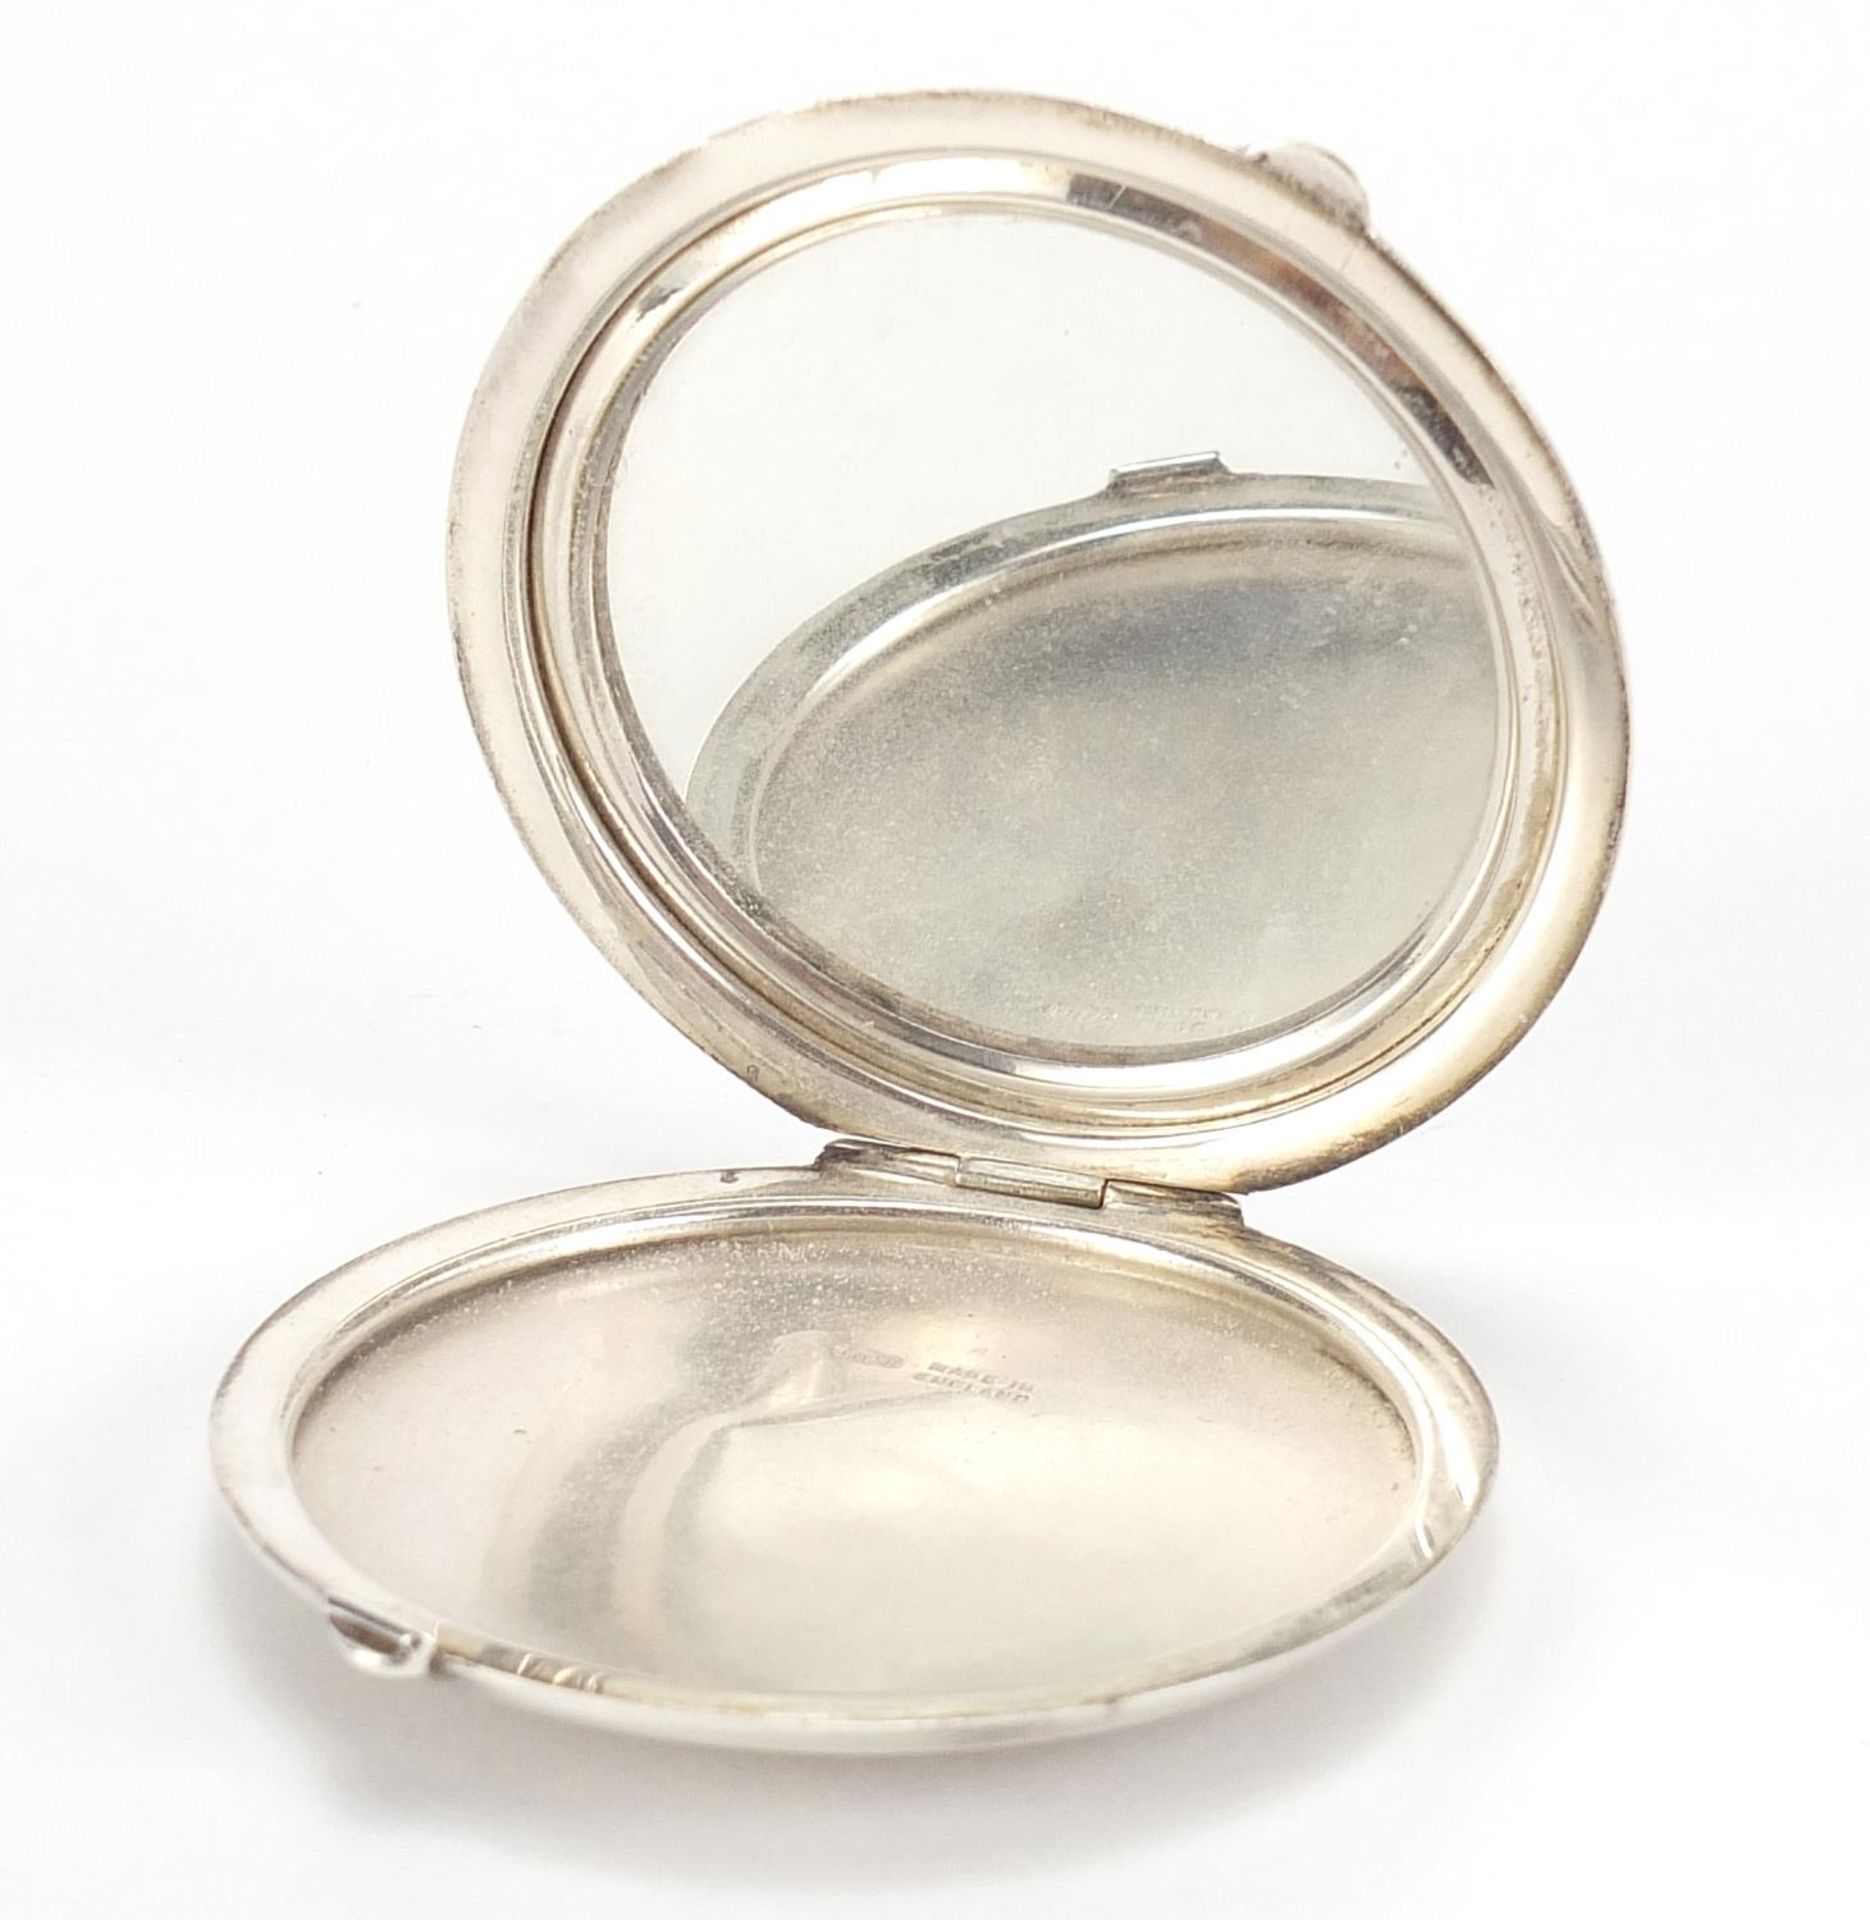 Joseph Gloster Ltd, unmarked silver and guilloche enamel compact, 6.8cm in diameter, 66.5g :For - Image 3 of 5